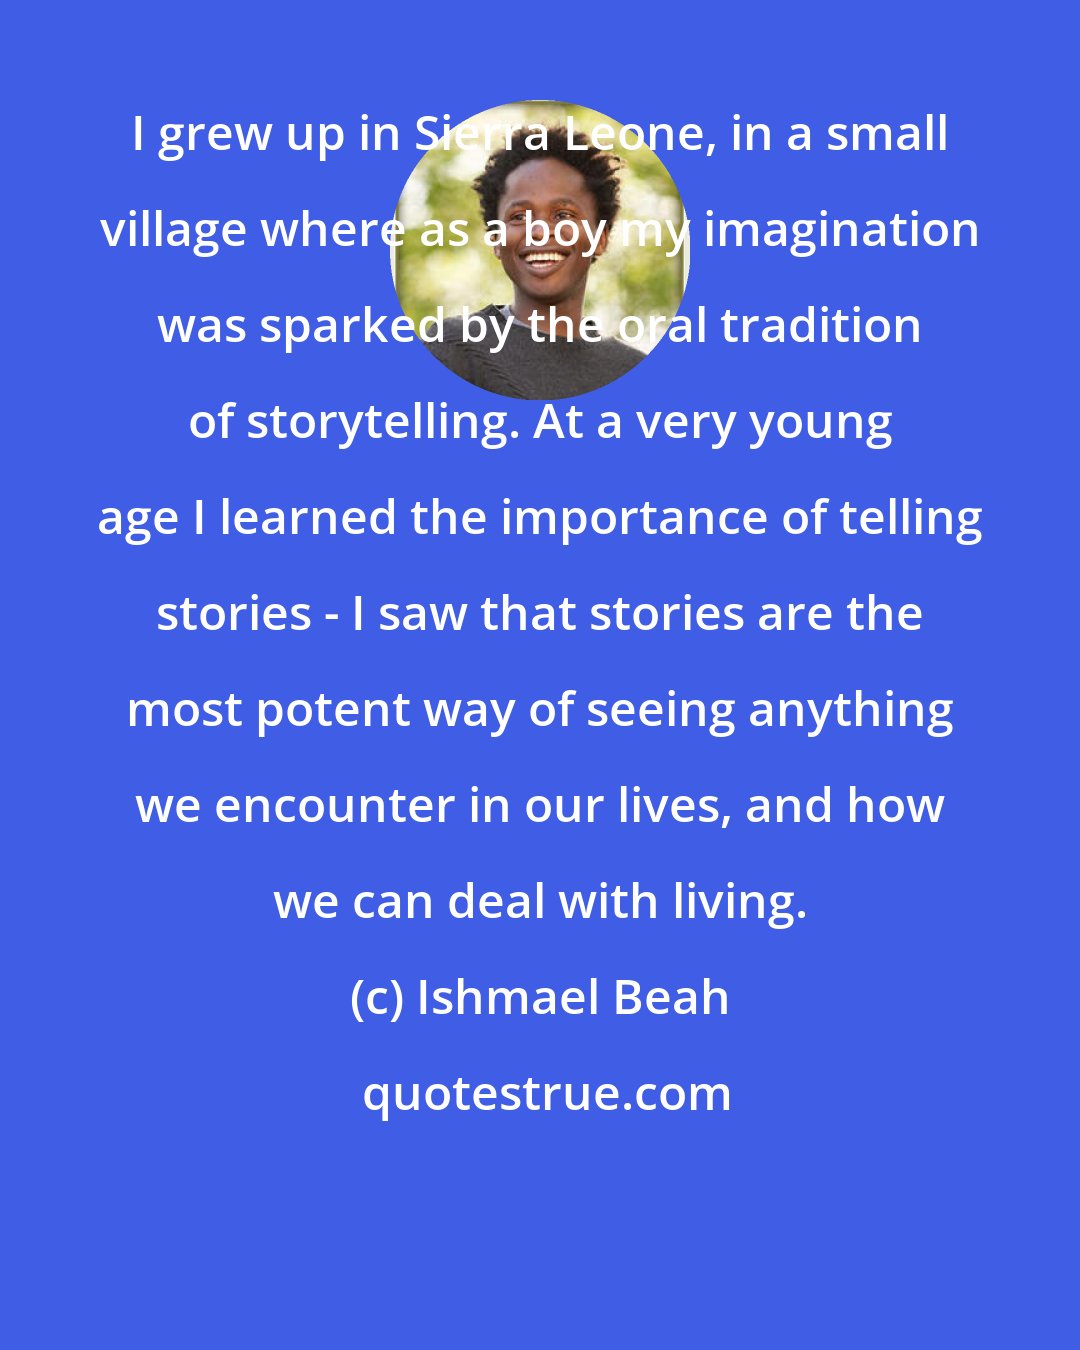 Ishmael Beah: I grew up in Sierra Leone, in a small village where as a boy my imagination was sparked by the oral tradition of storytelling. At a very young age I learned the importance of telling stories - I saw that stories are the most potent way of seeing anything we encounter in our lives, and how we can deal with living.